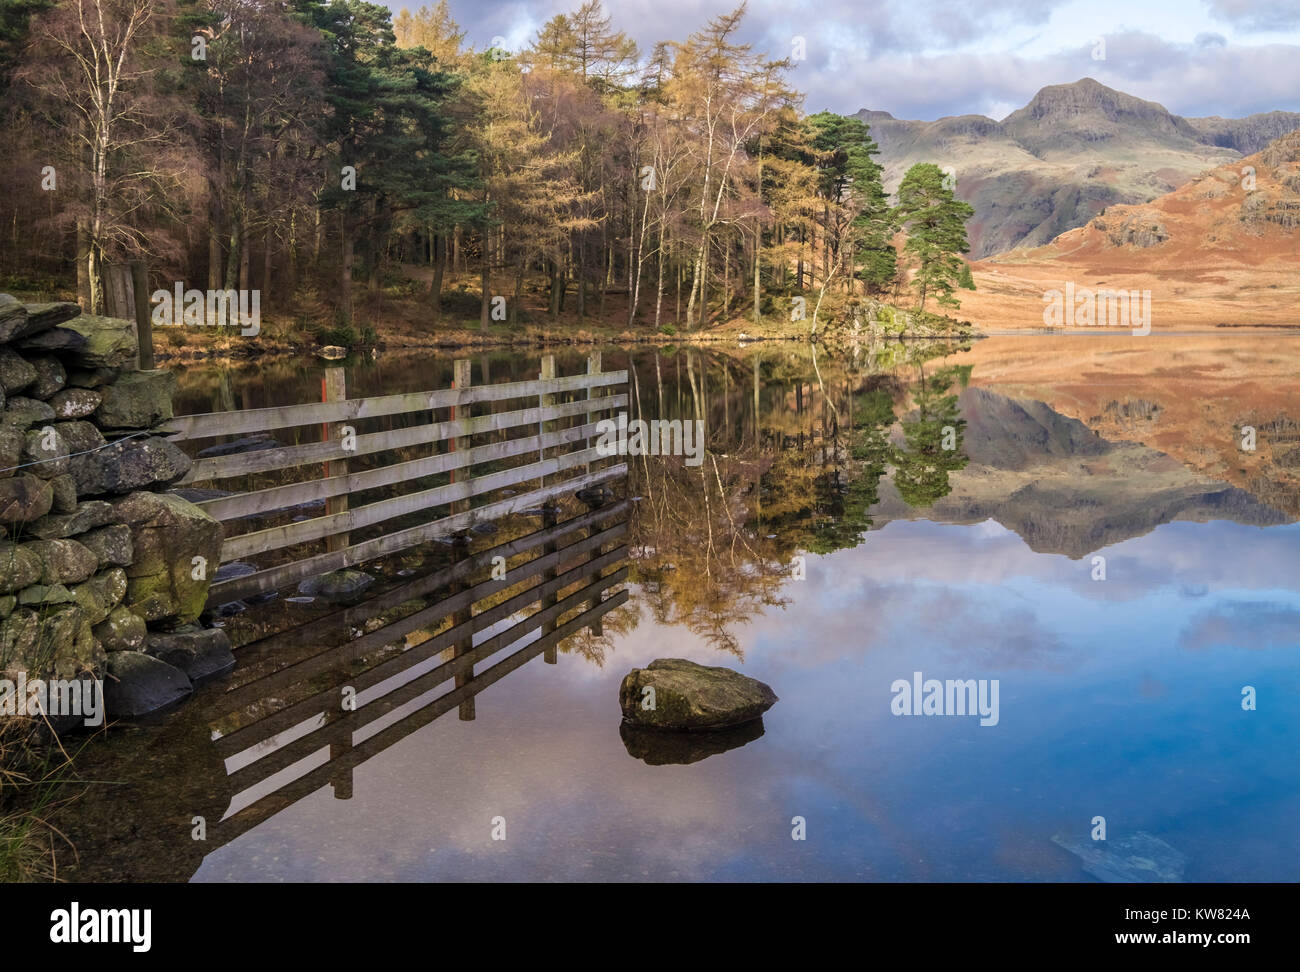 Blea Tarn during autumn, with Langdale Pikes in the background, Little Langdale, Lake District National Park, Cumbria, England, UK Stock Photo